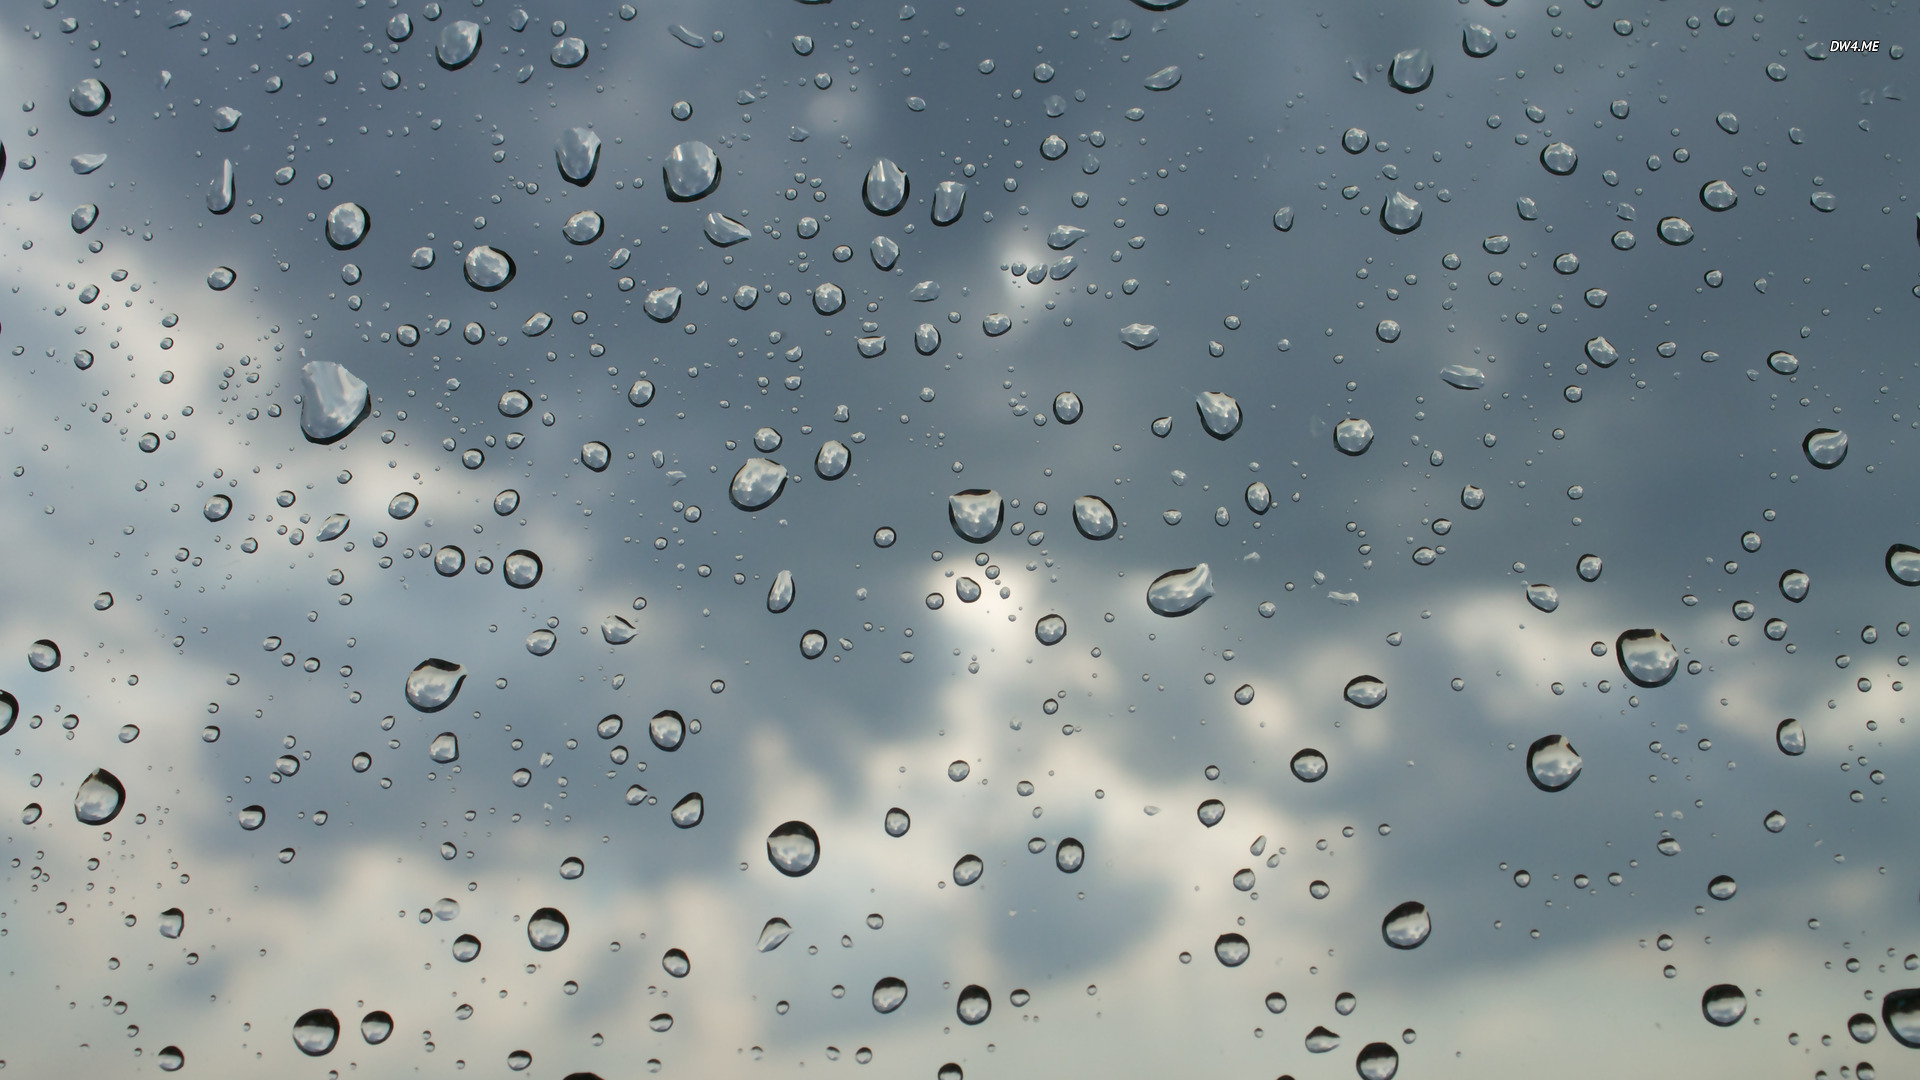 Raindrops and clouds wallpaper   Photography wallpapers   585